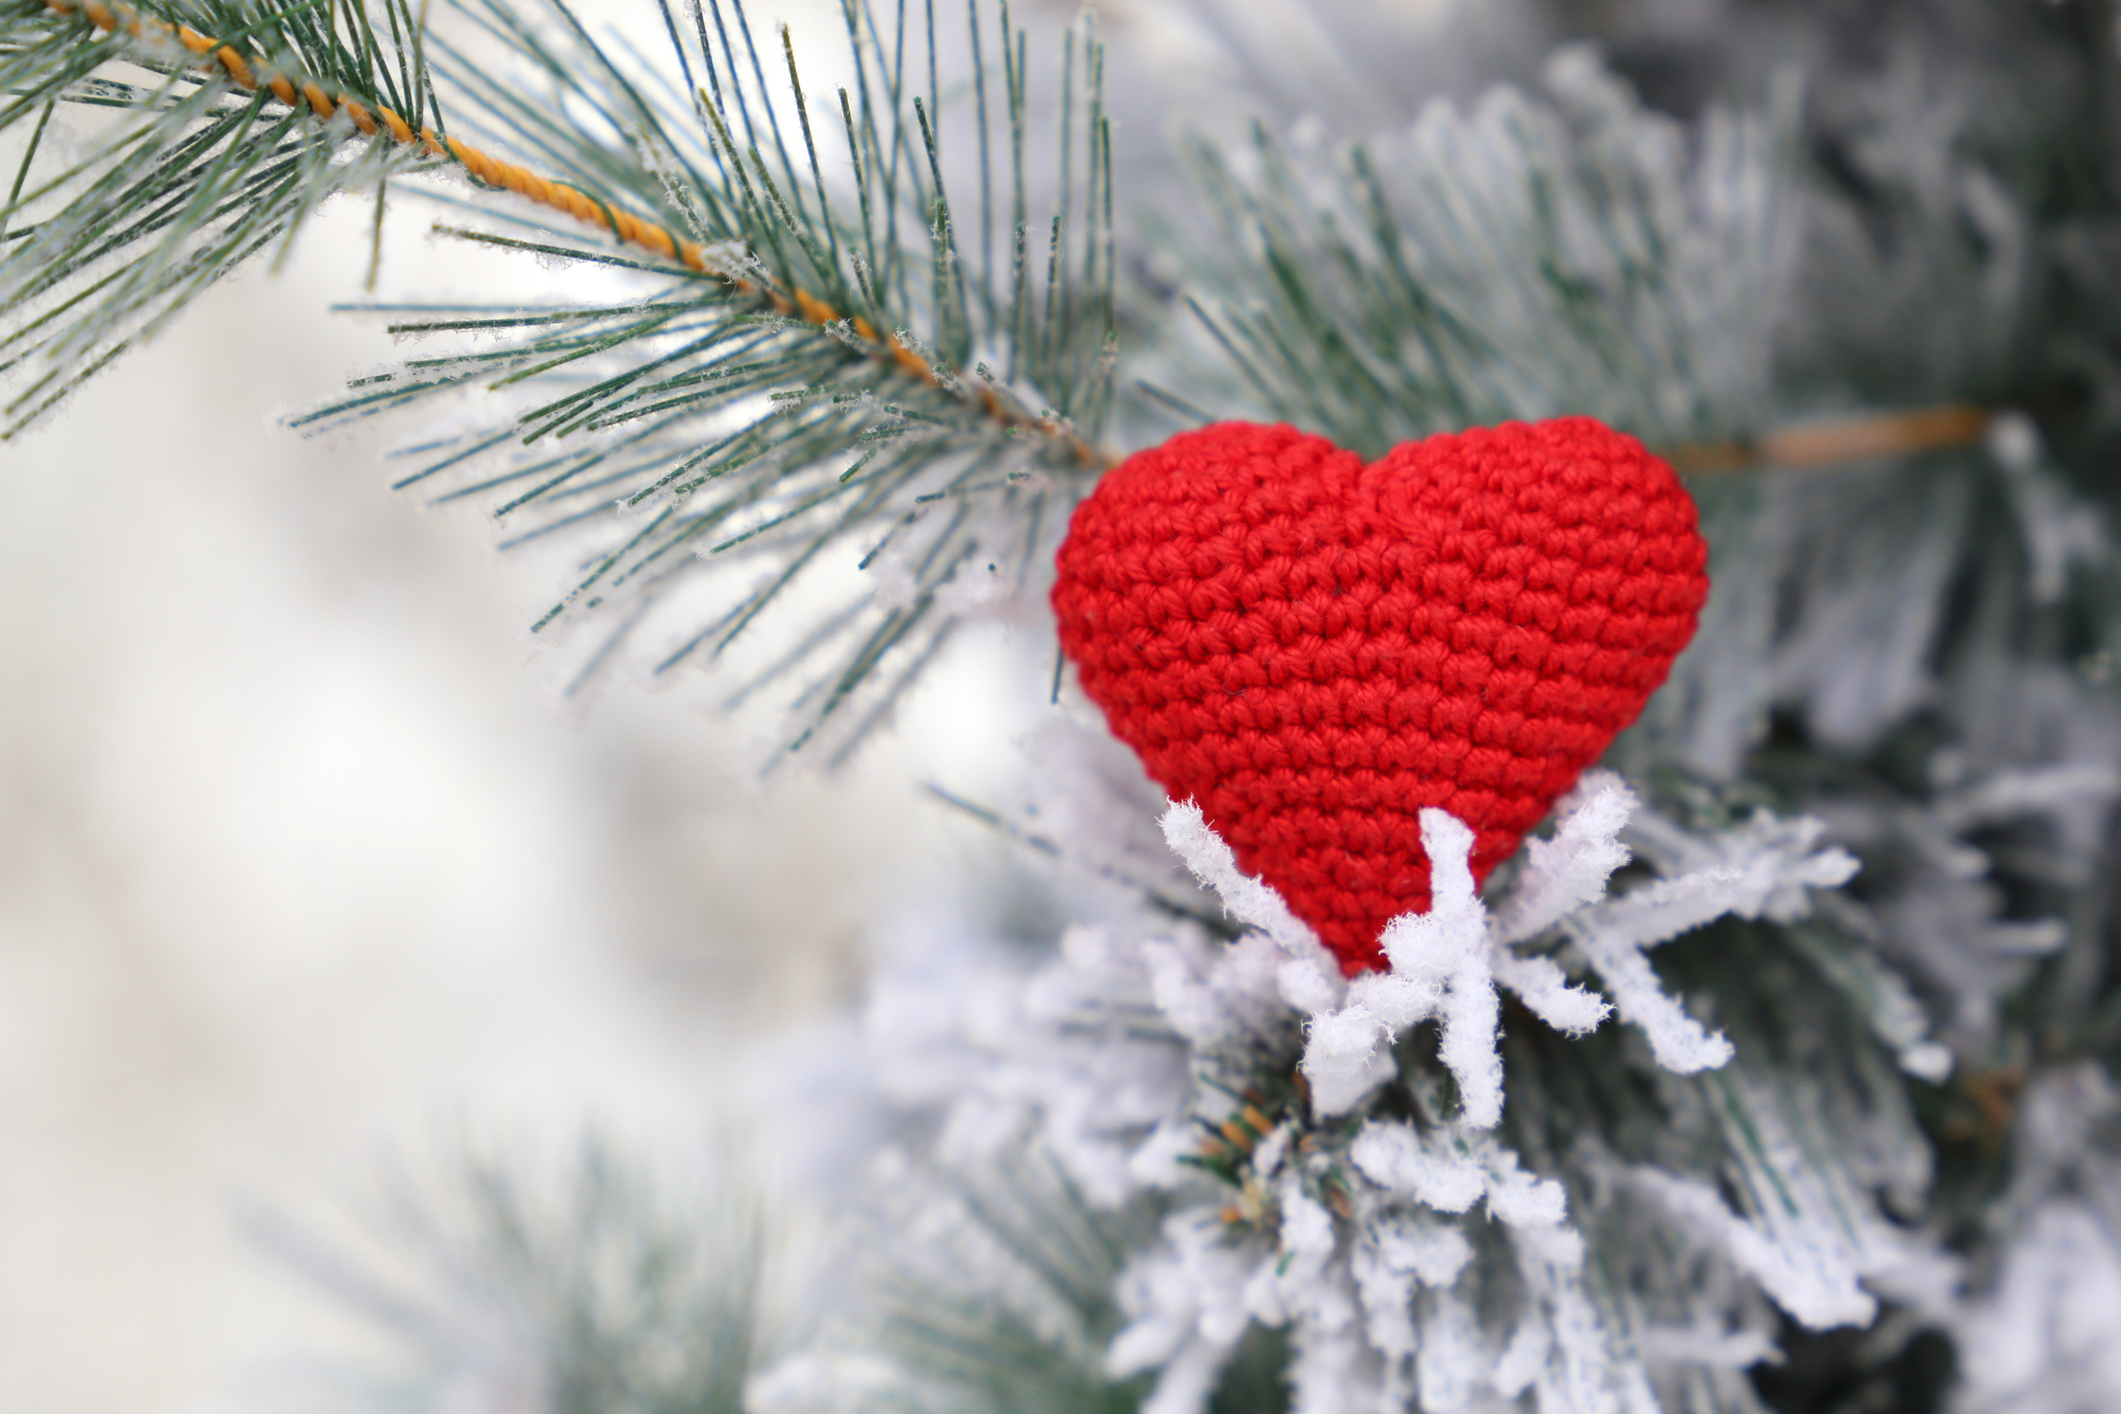 Food Allergies & Grief at Christmas